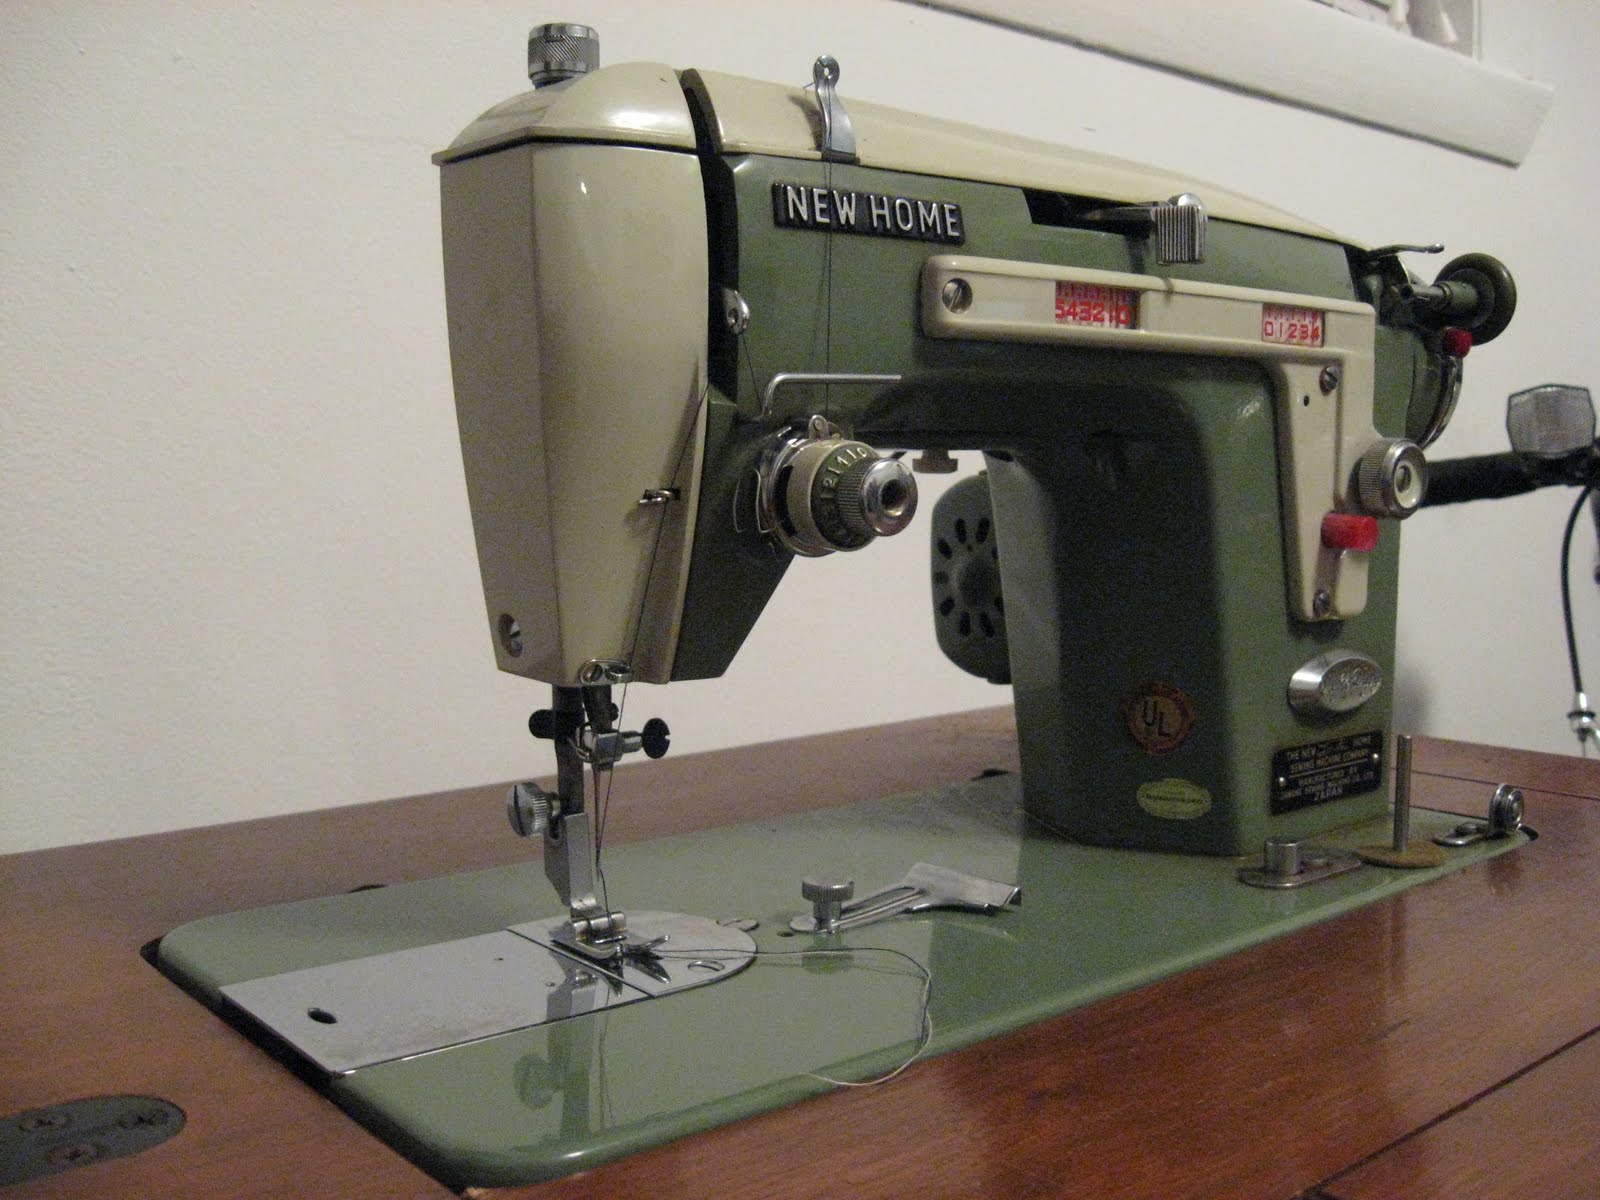 Loophole in my Dreaming: New Home Sewing Machine 532